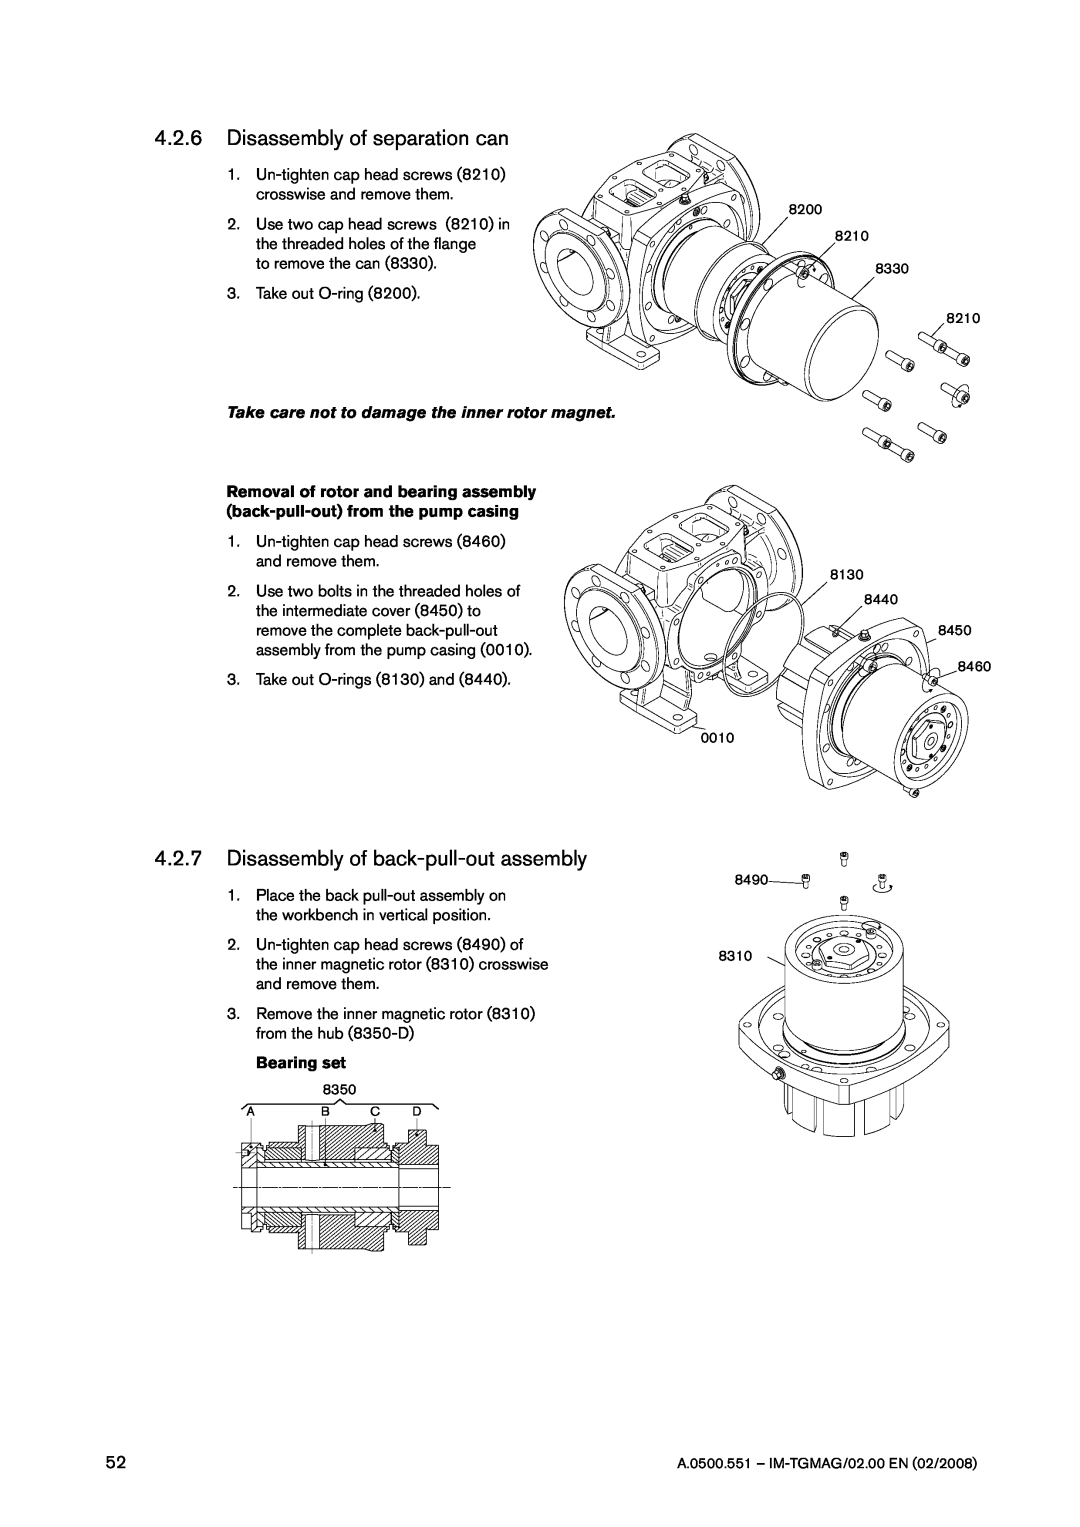 SPX Cooling Technologies TG MAG58-80 Disassembly of separation can, 4.2.7Disassembly of back-pull-outassembly, Bearing set 